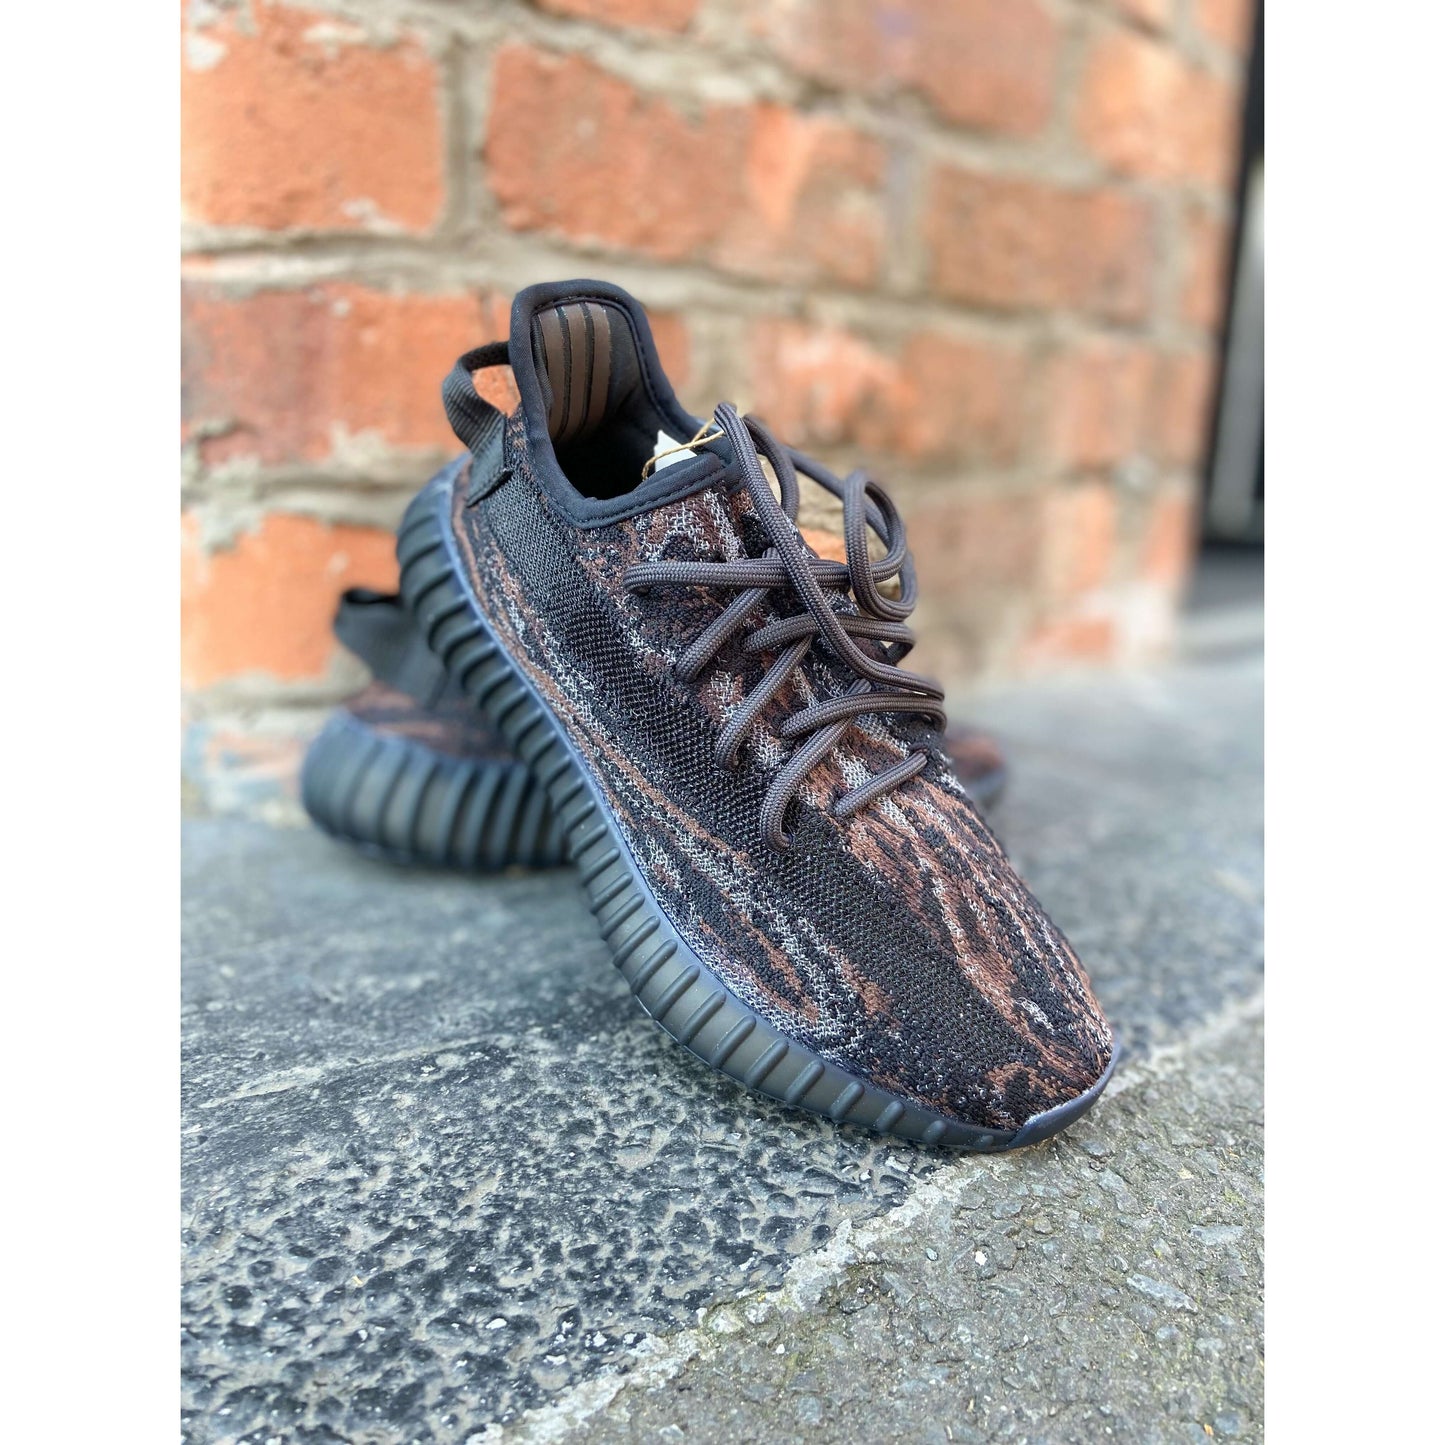 Adidas Yeezy Boost 350 V2 MX Rock by Yeezy from £270.00